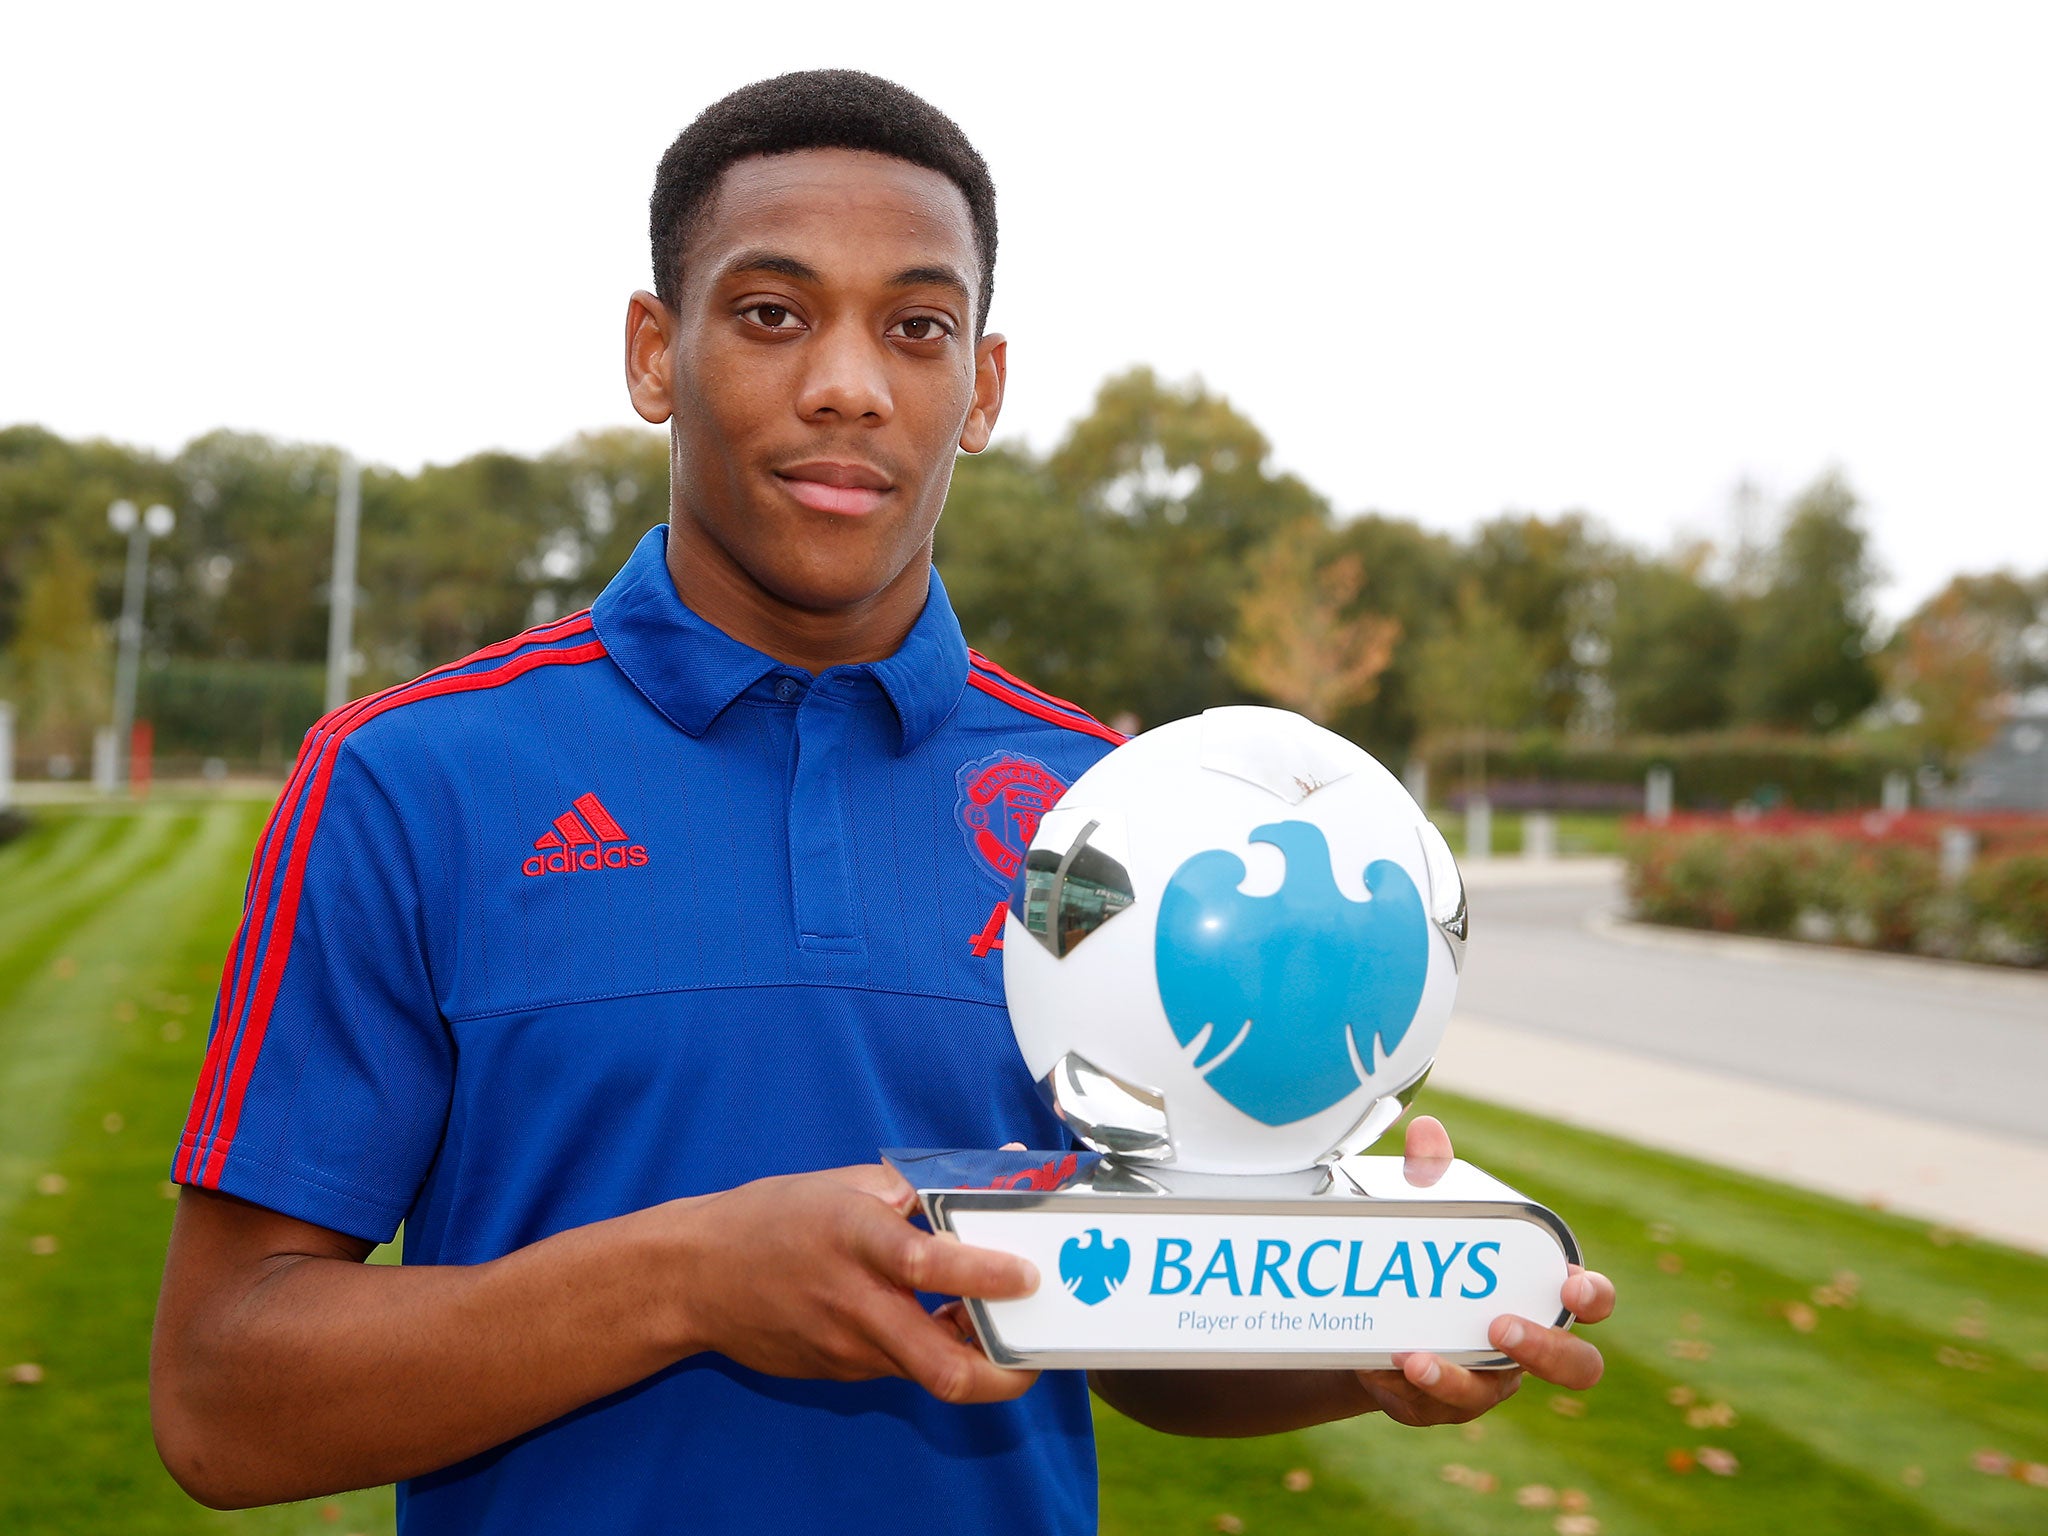 Anthony Martial receives his Barclays Player of the Month award for September. Voted for by the Barclays Panel - a group of former players, journalists and key football stakeholders